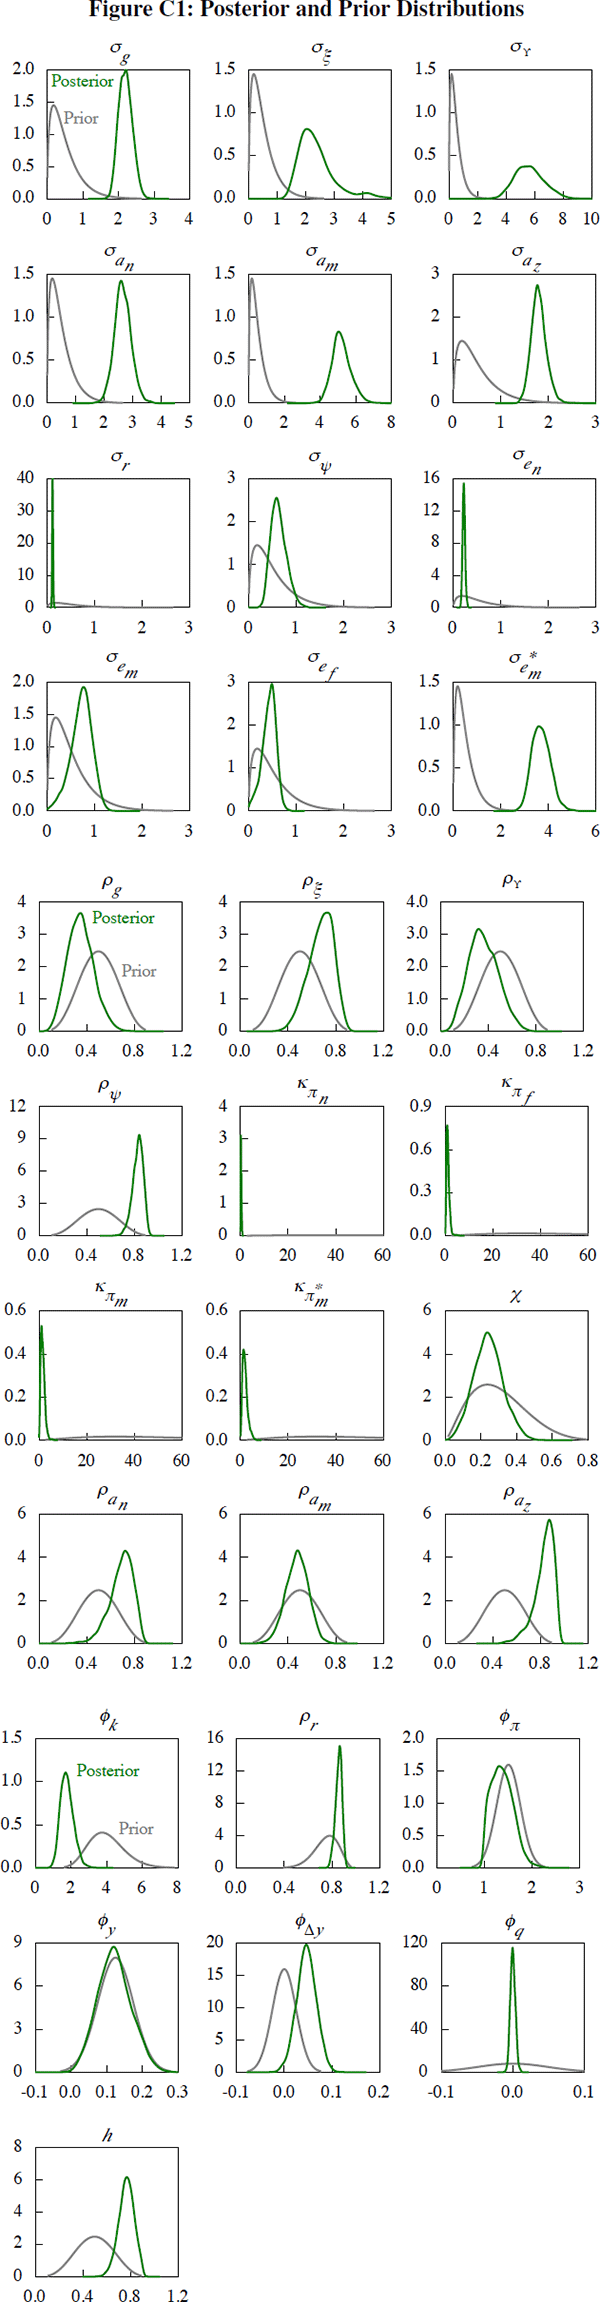 Figure C1: Posterior and Prior Distributions